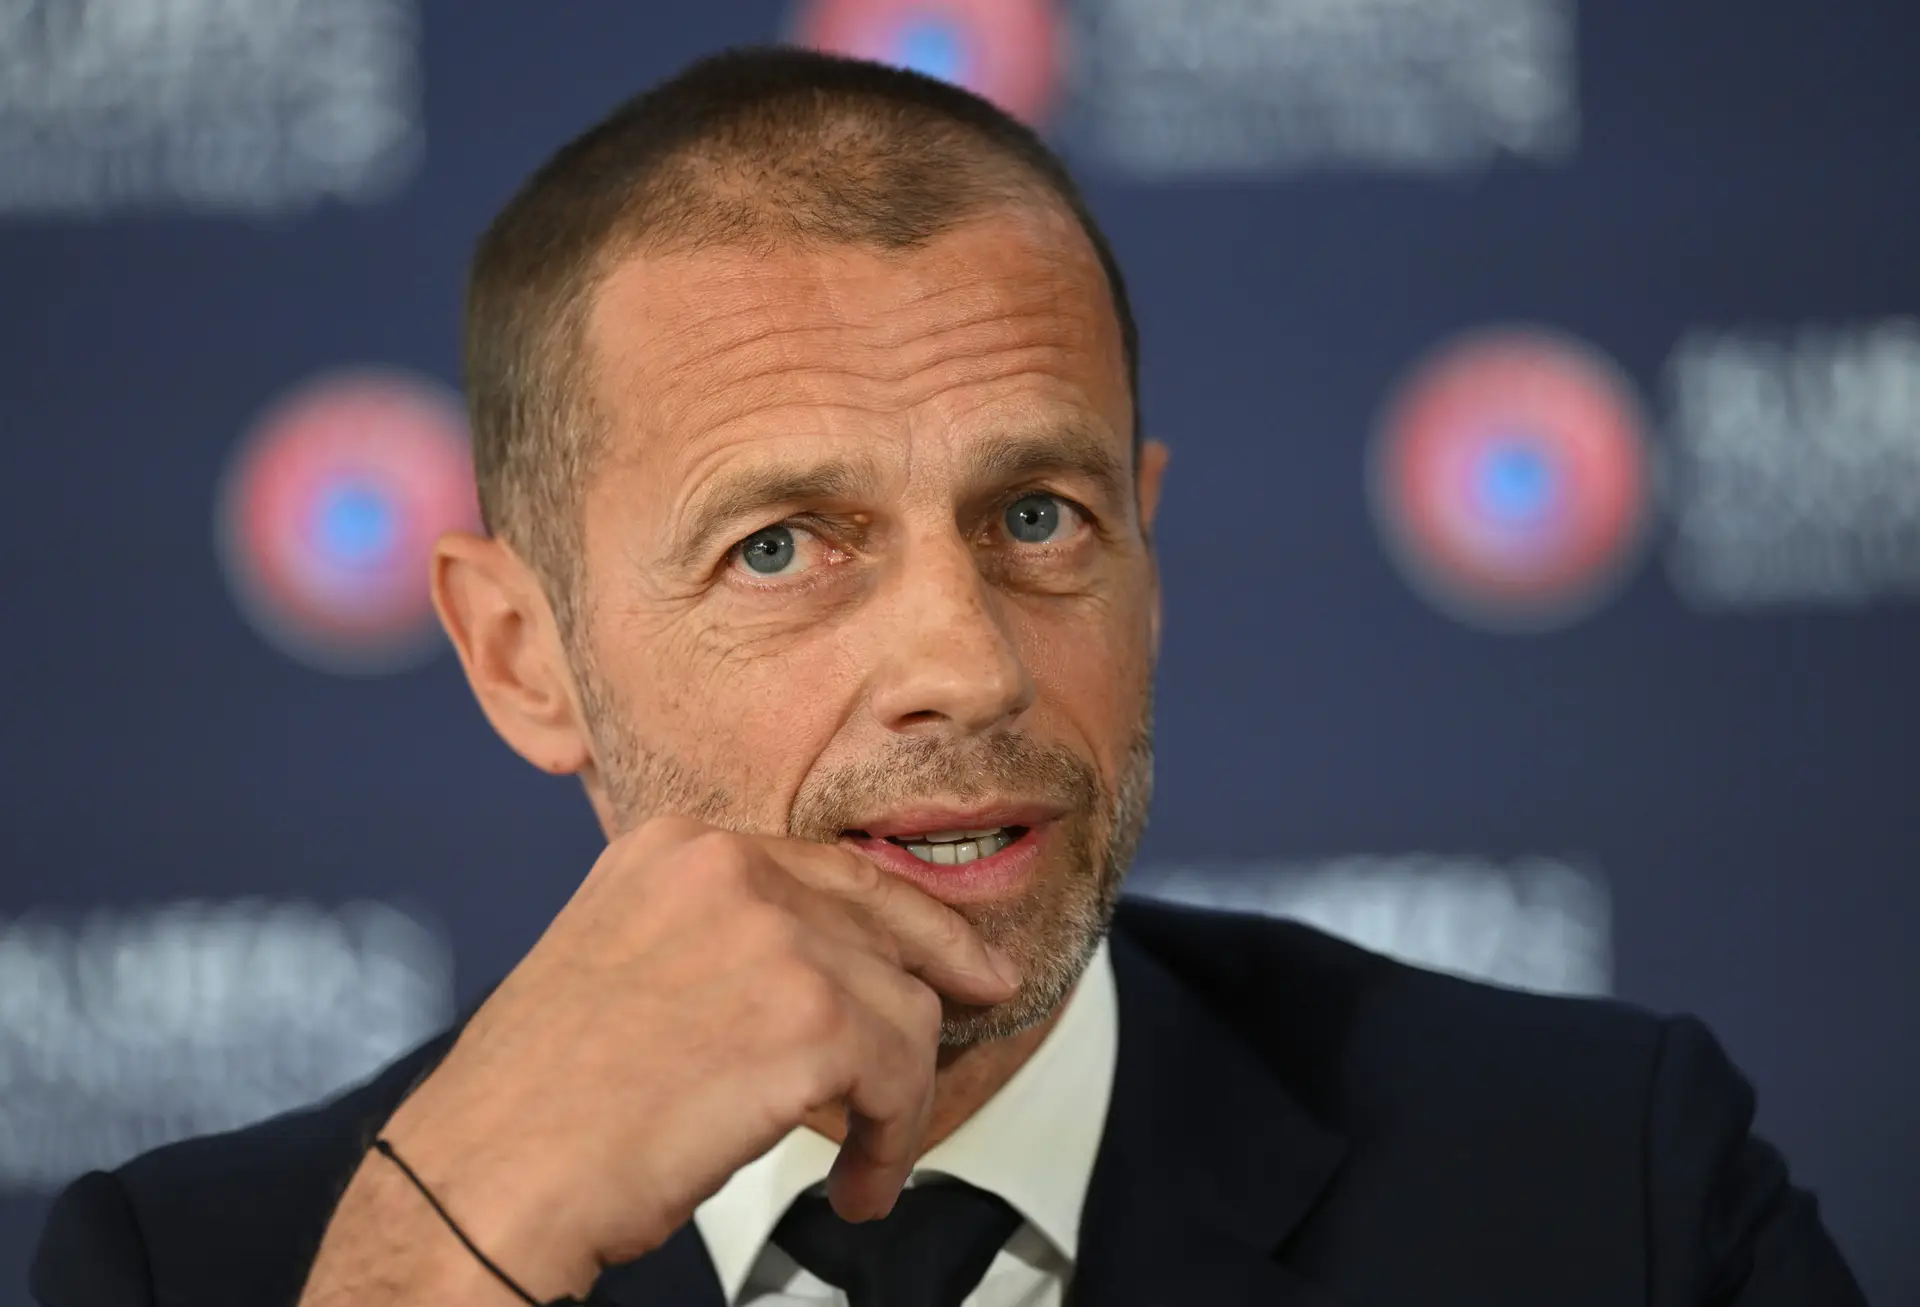 VIENNA, AUSTRIA – MAY 11: UEFA president Aleksander Ceferin addresses the media during a press conference at Messe Wien on May 11, 2022 in Vienna, Austria. (Photo by Stuart Franklin – UEFA/UEFA via Getty Images)